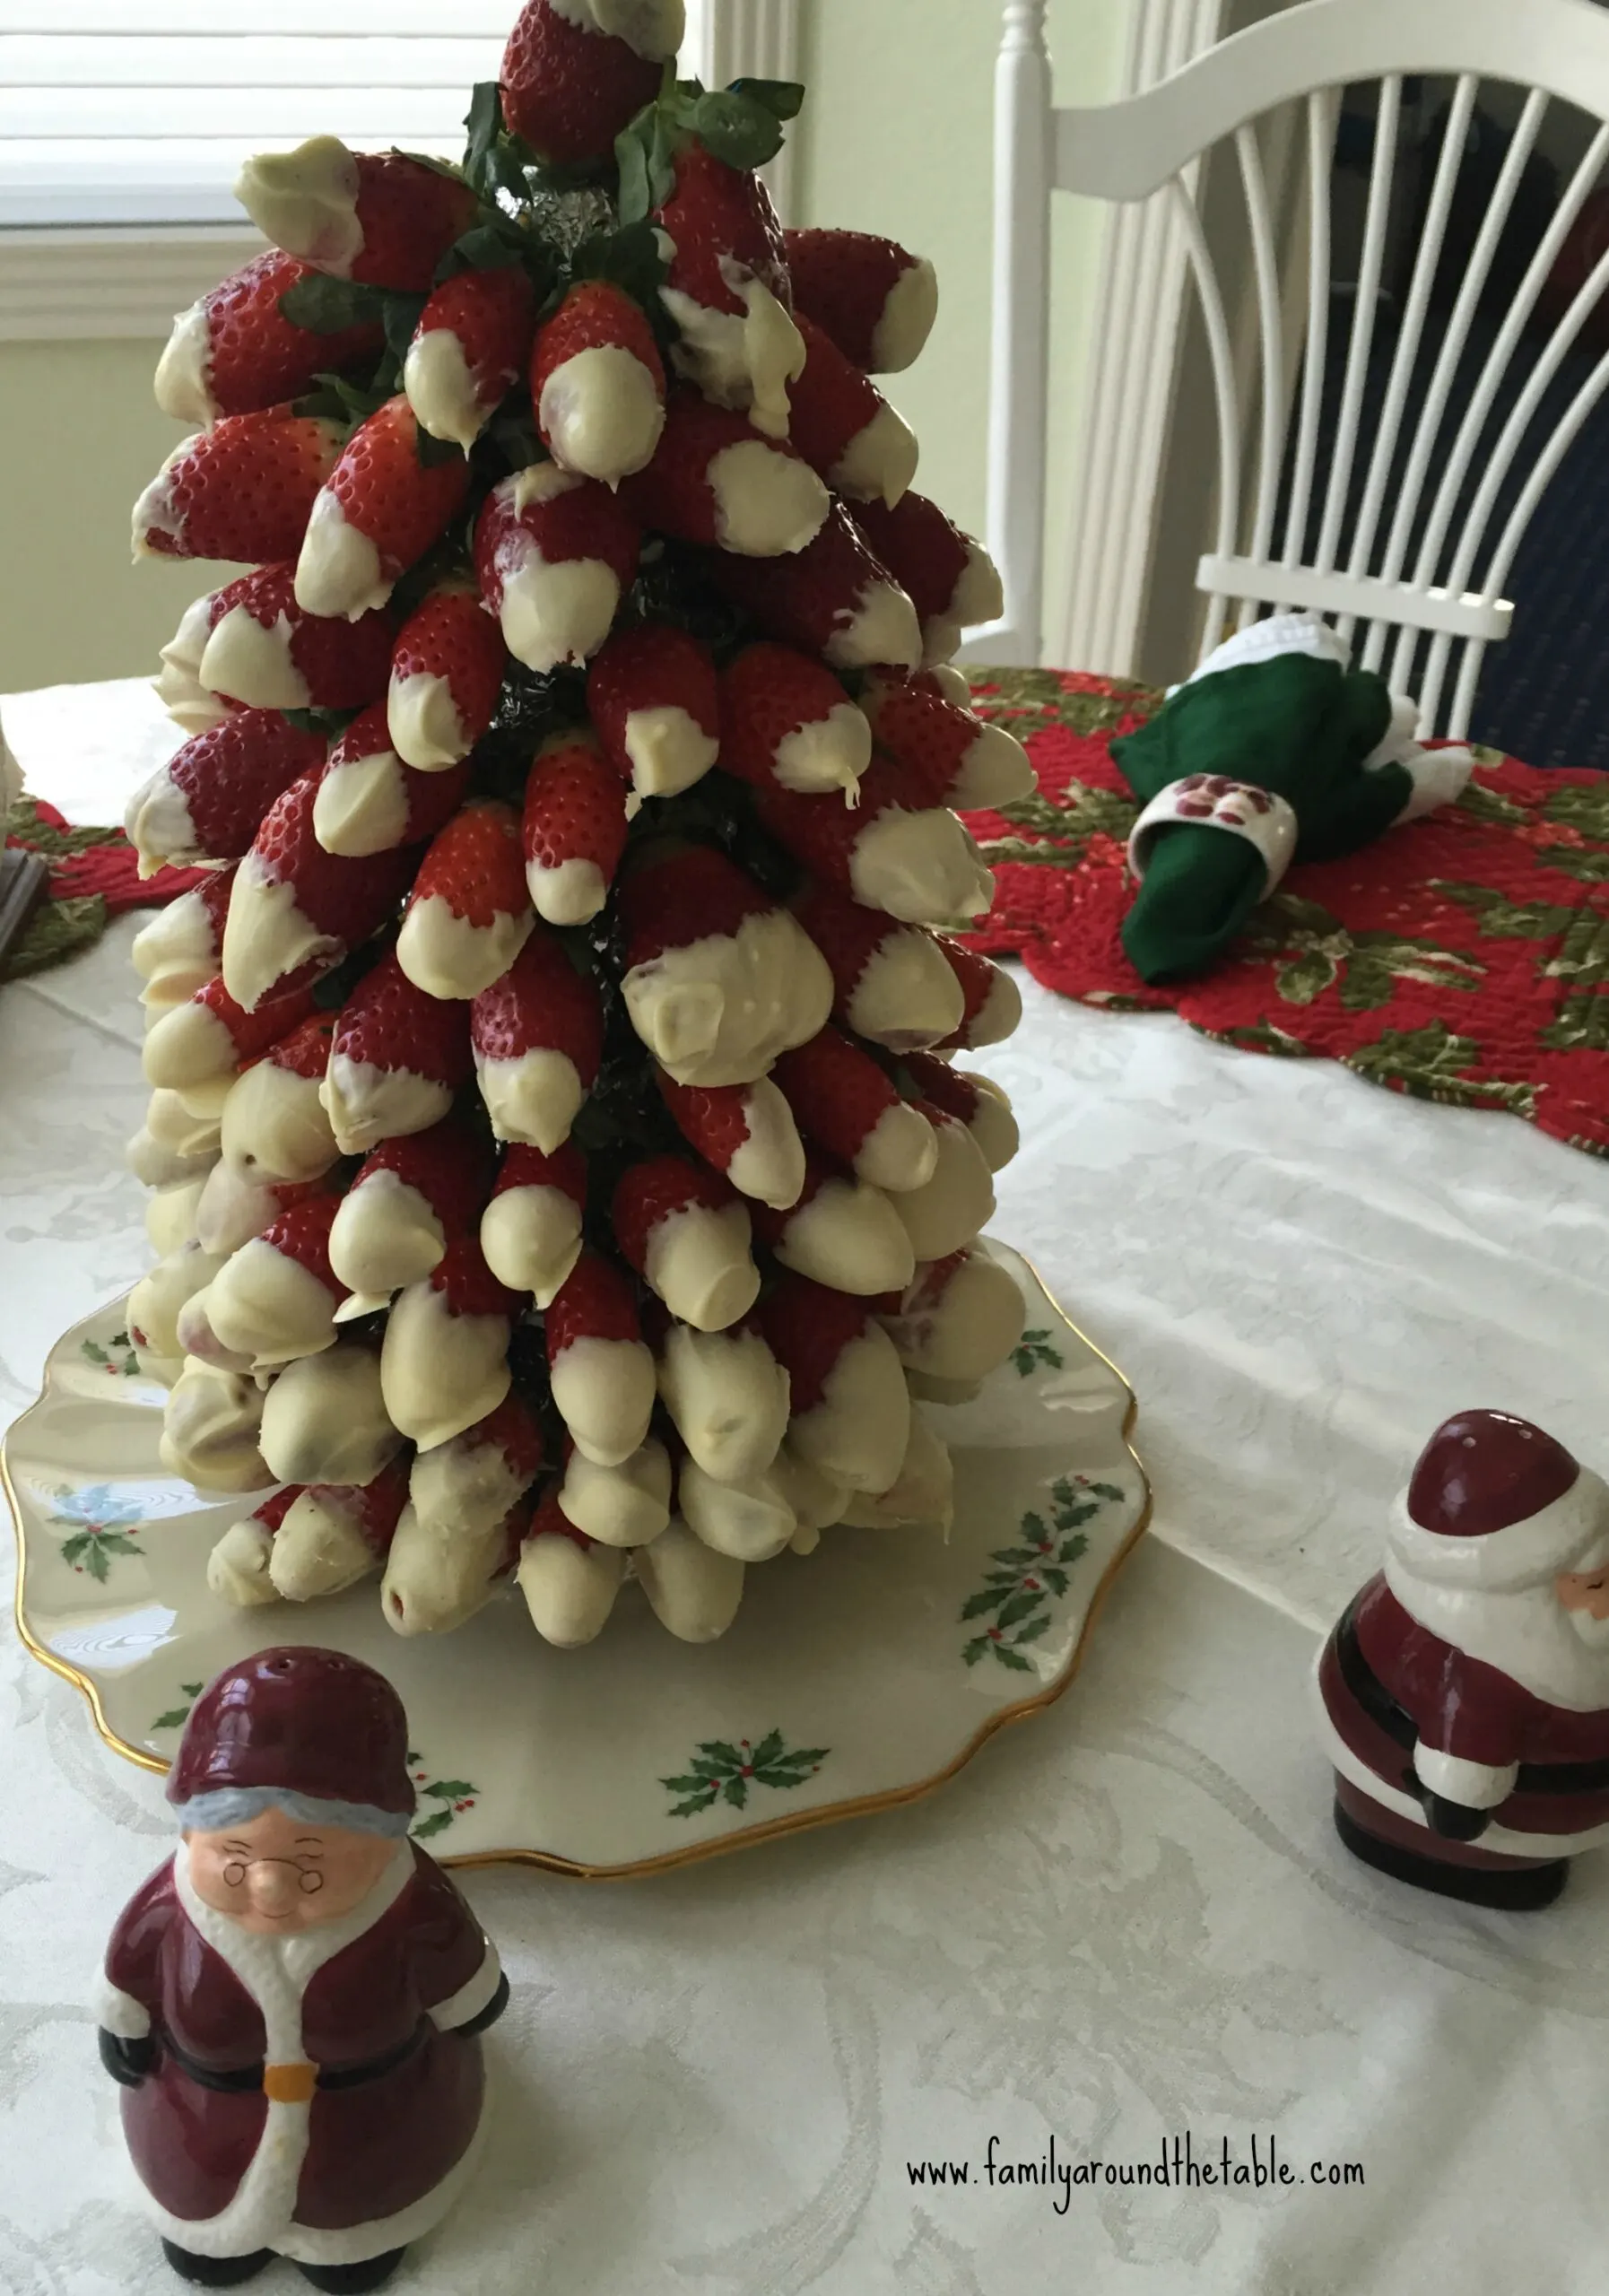 A tree made from strawberries dipped in white chocolate.